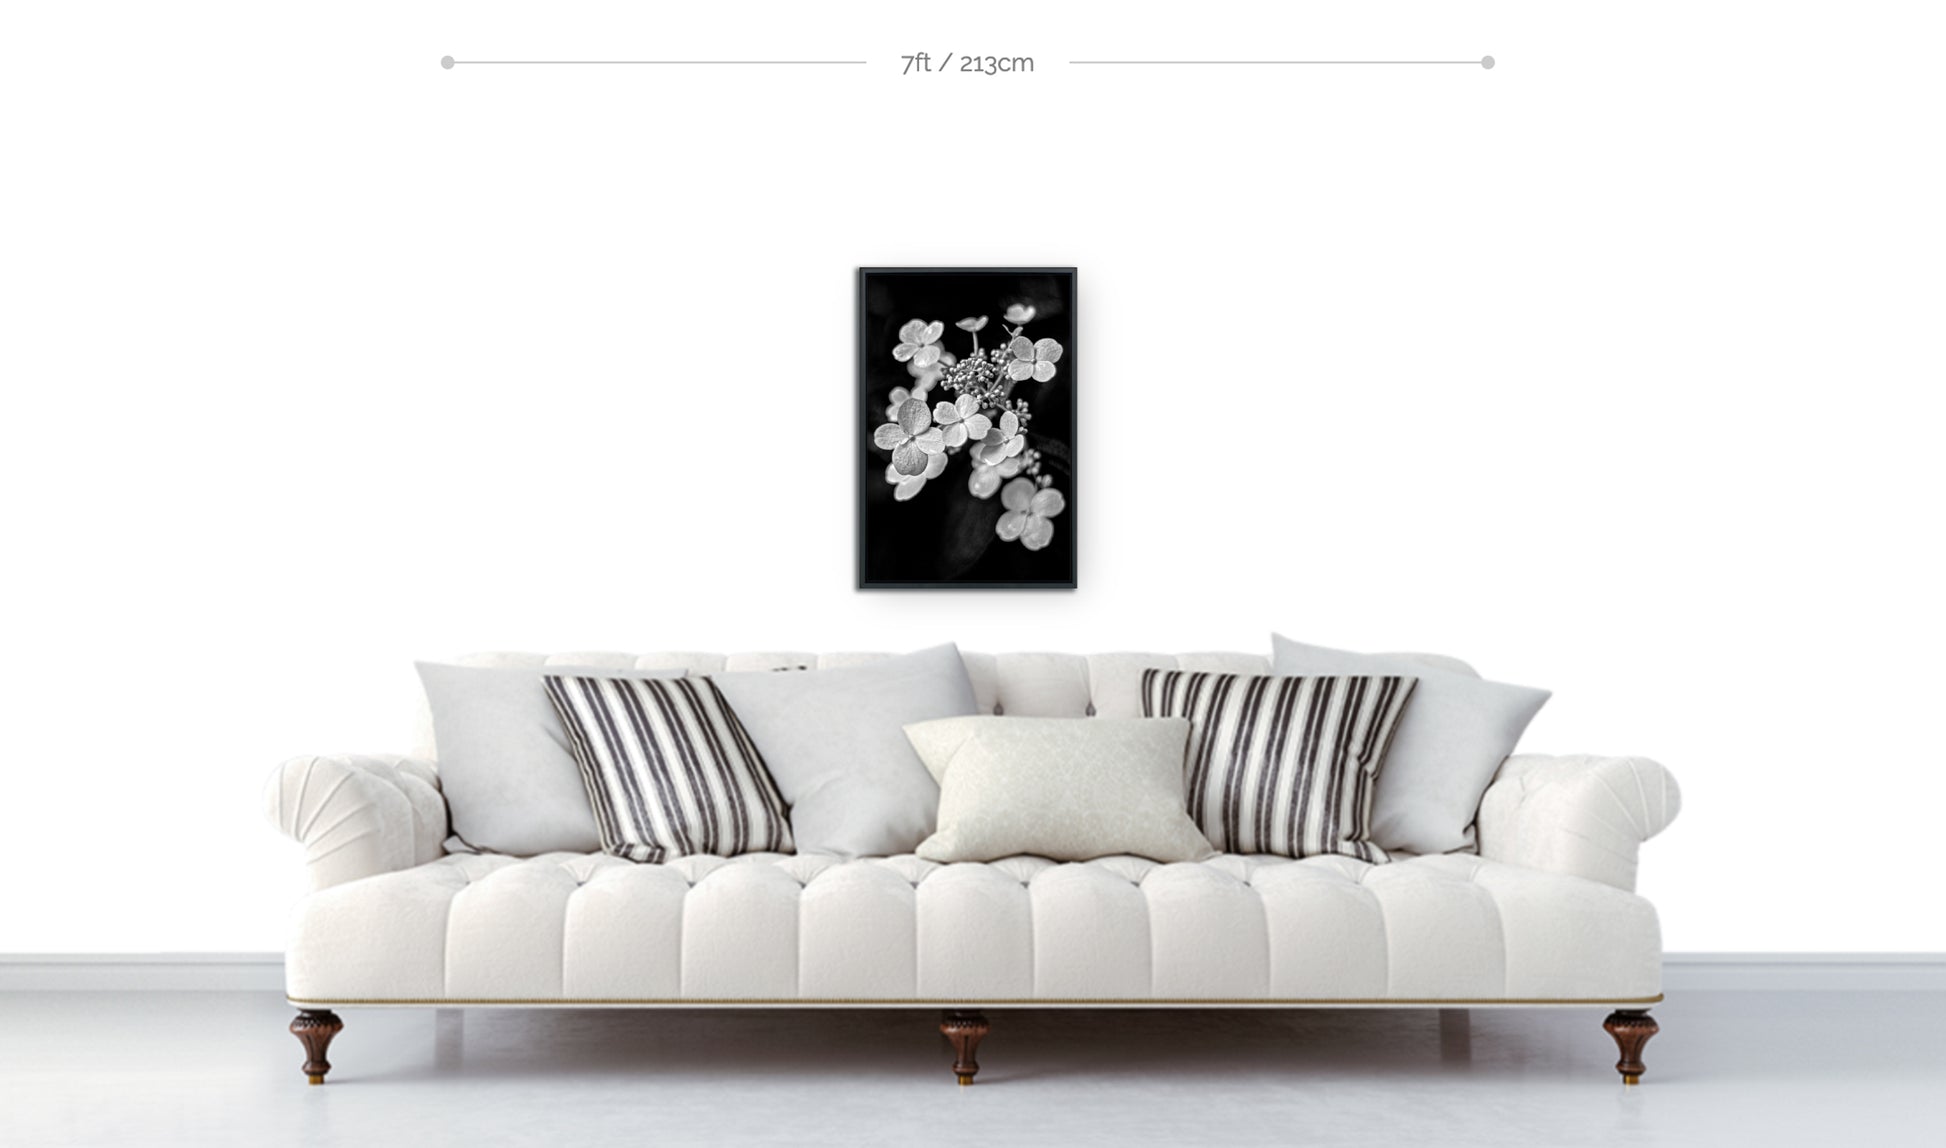 Metal wall decor 24x16 framed print black and white macro photograph tiny white flowers displayed hanging above sofa